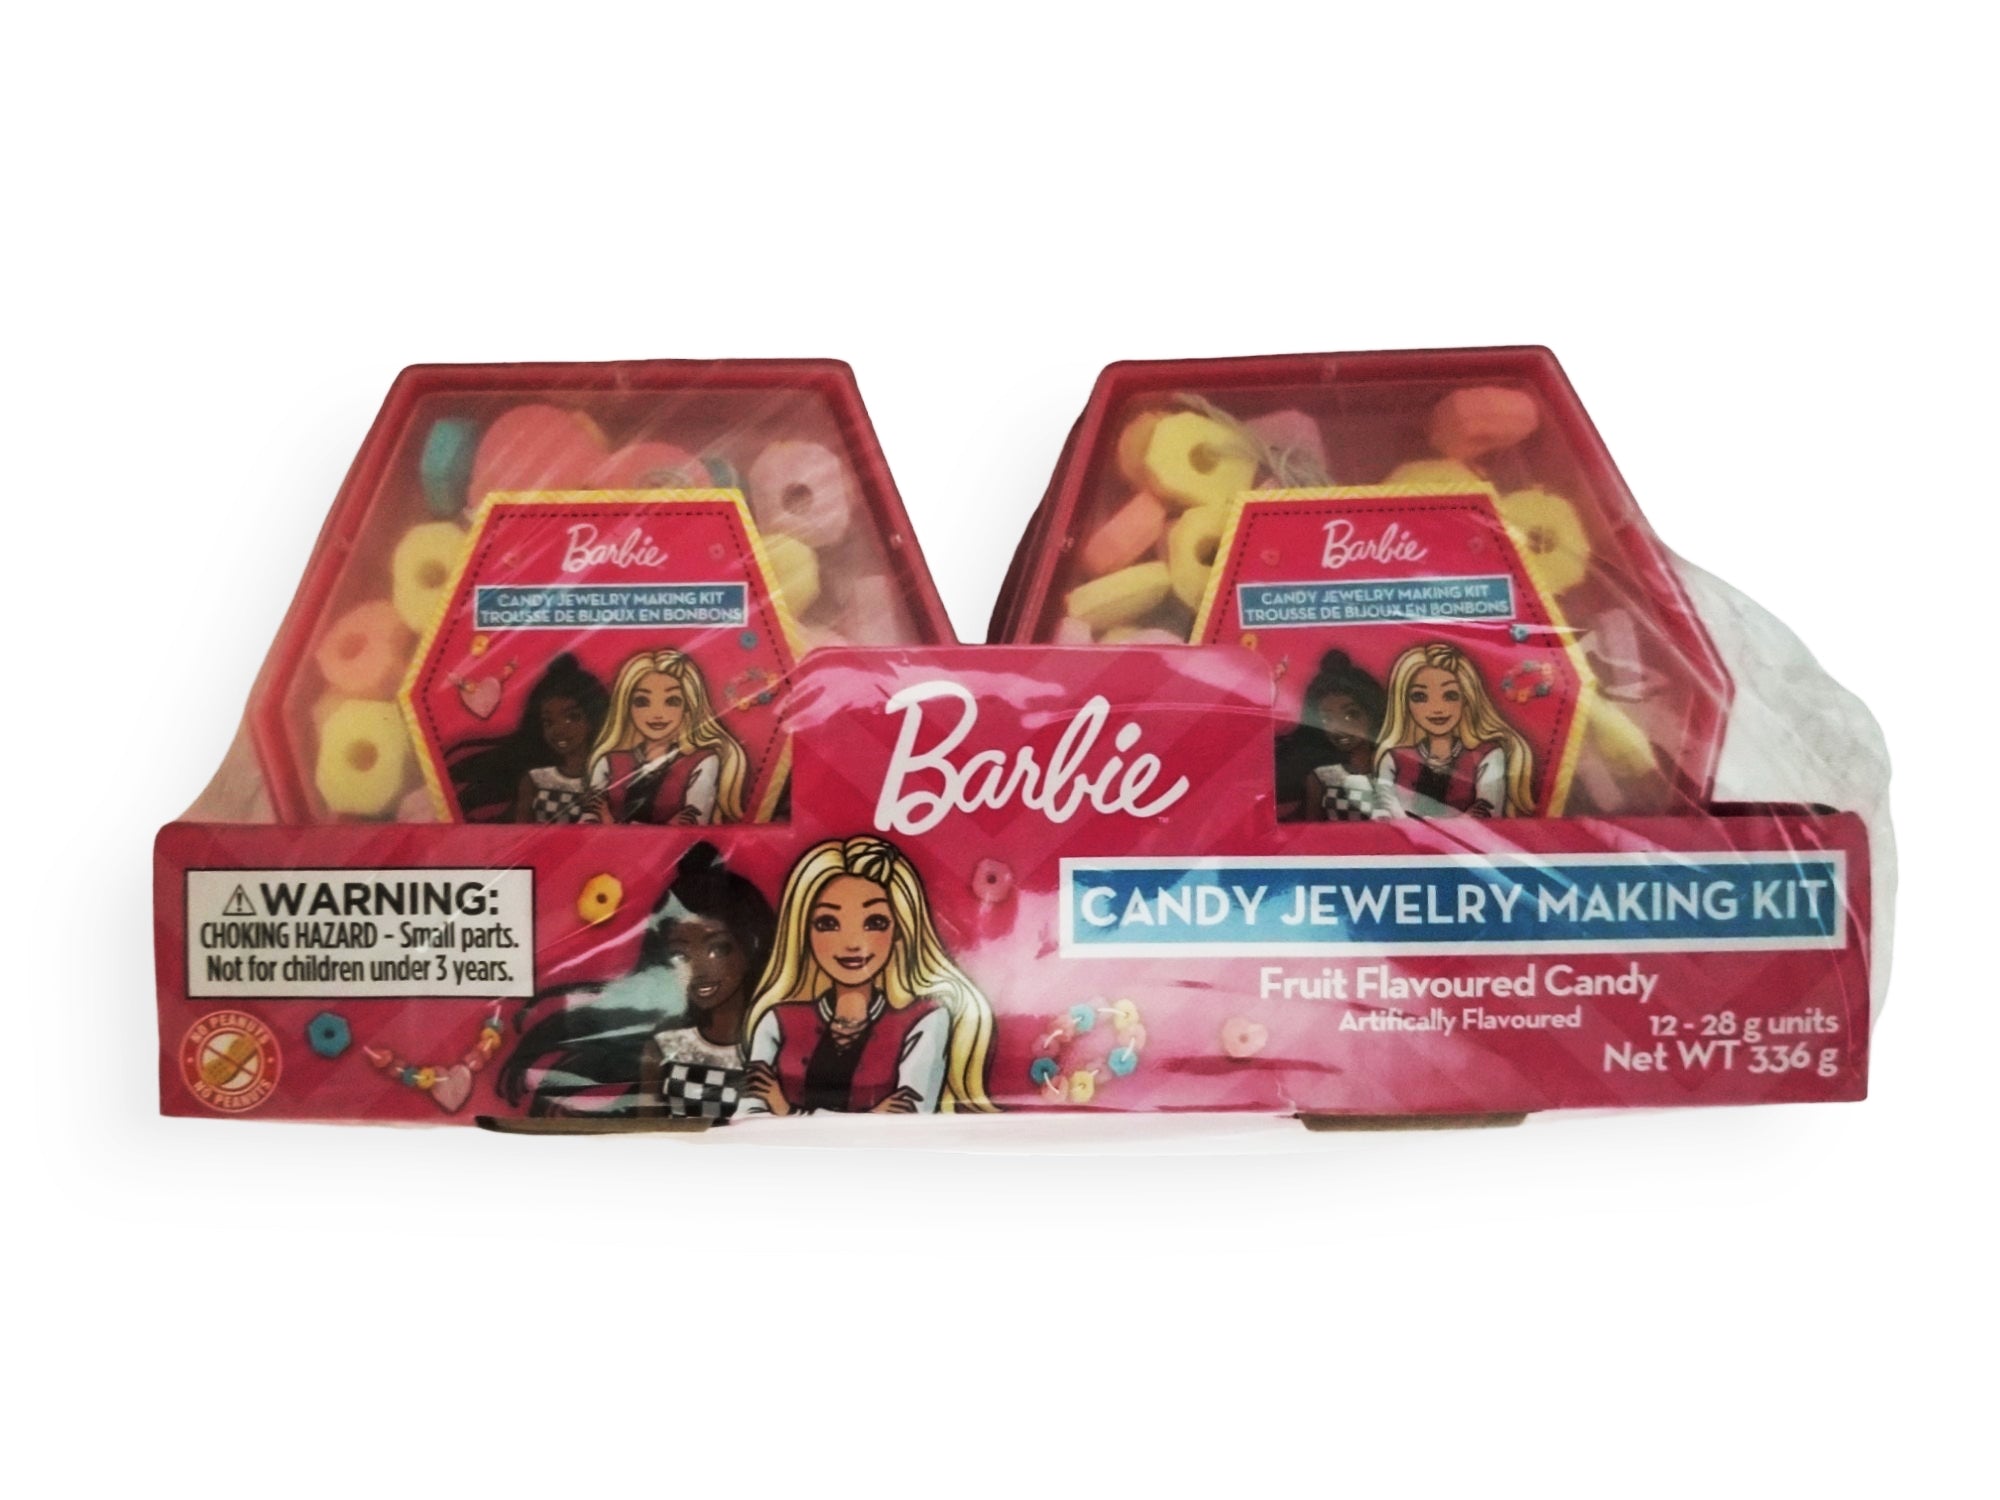 Barbie Candy Jewelry Making Kit (12x28g), front of package